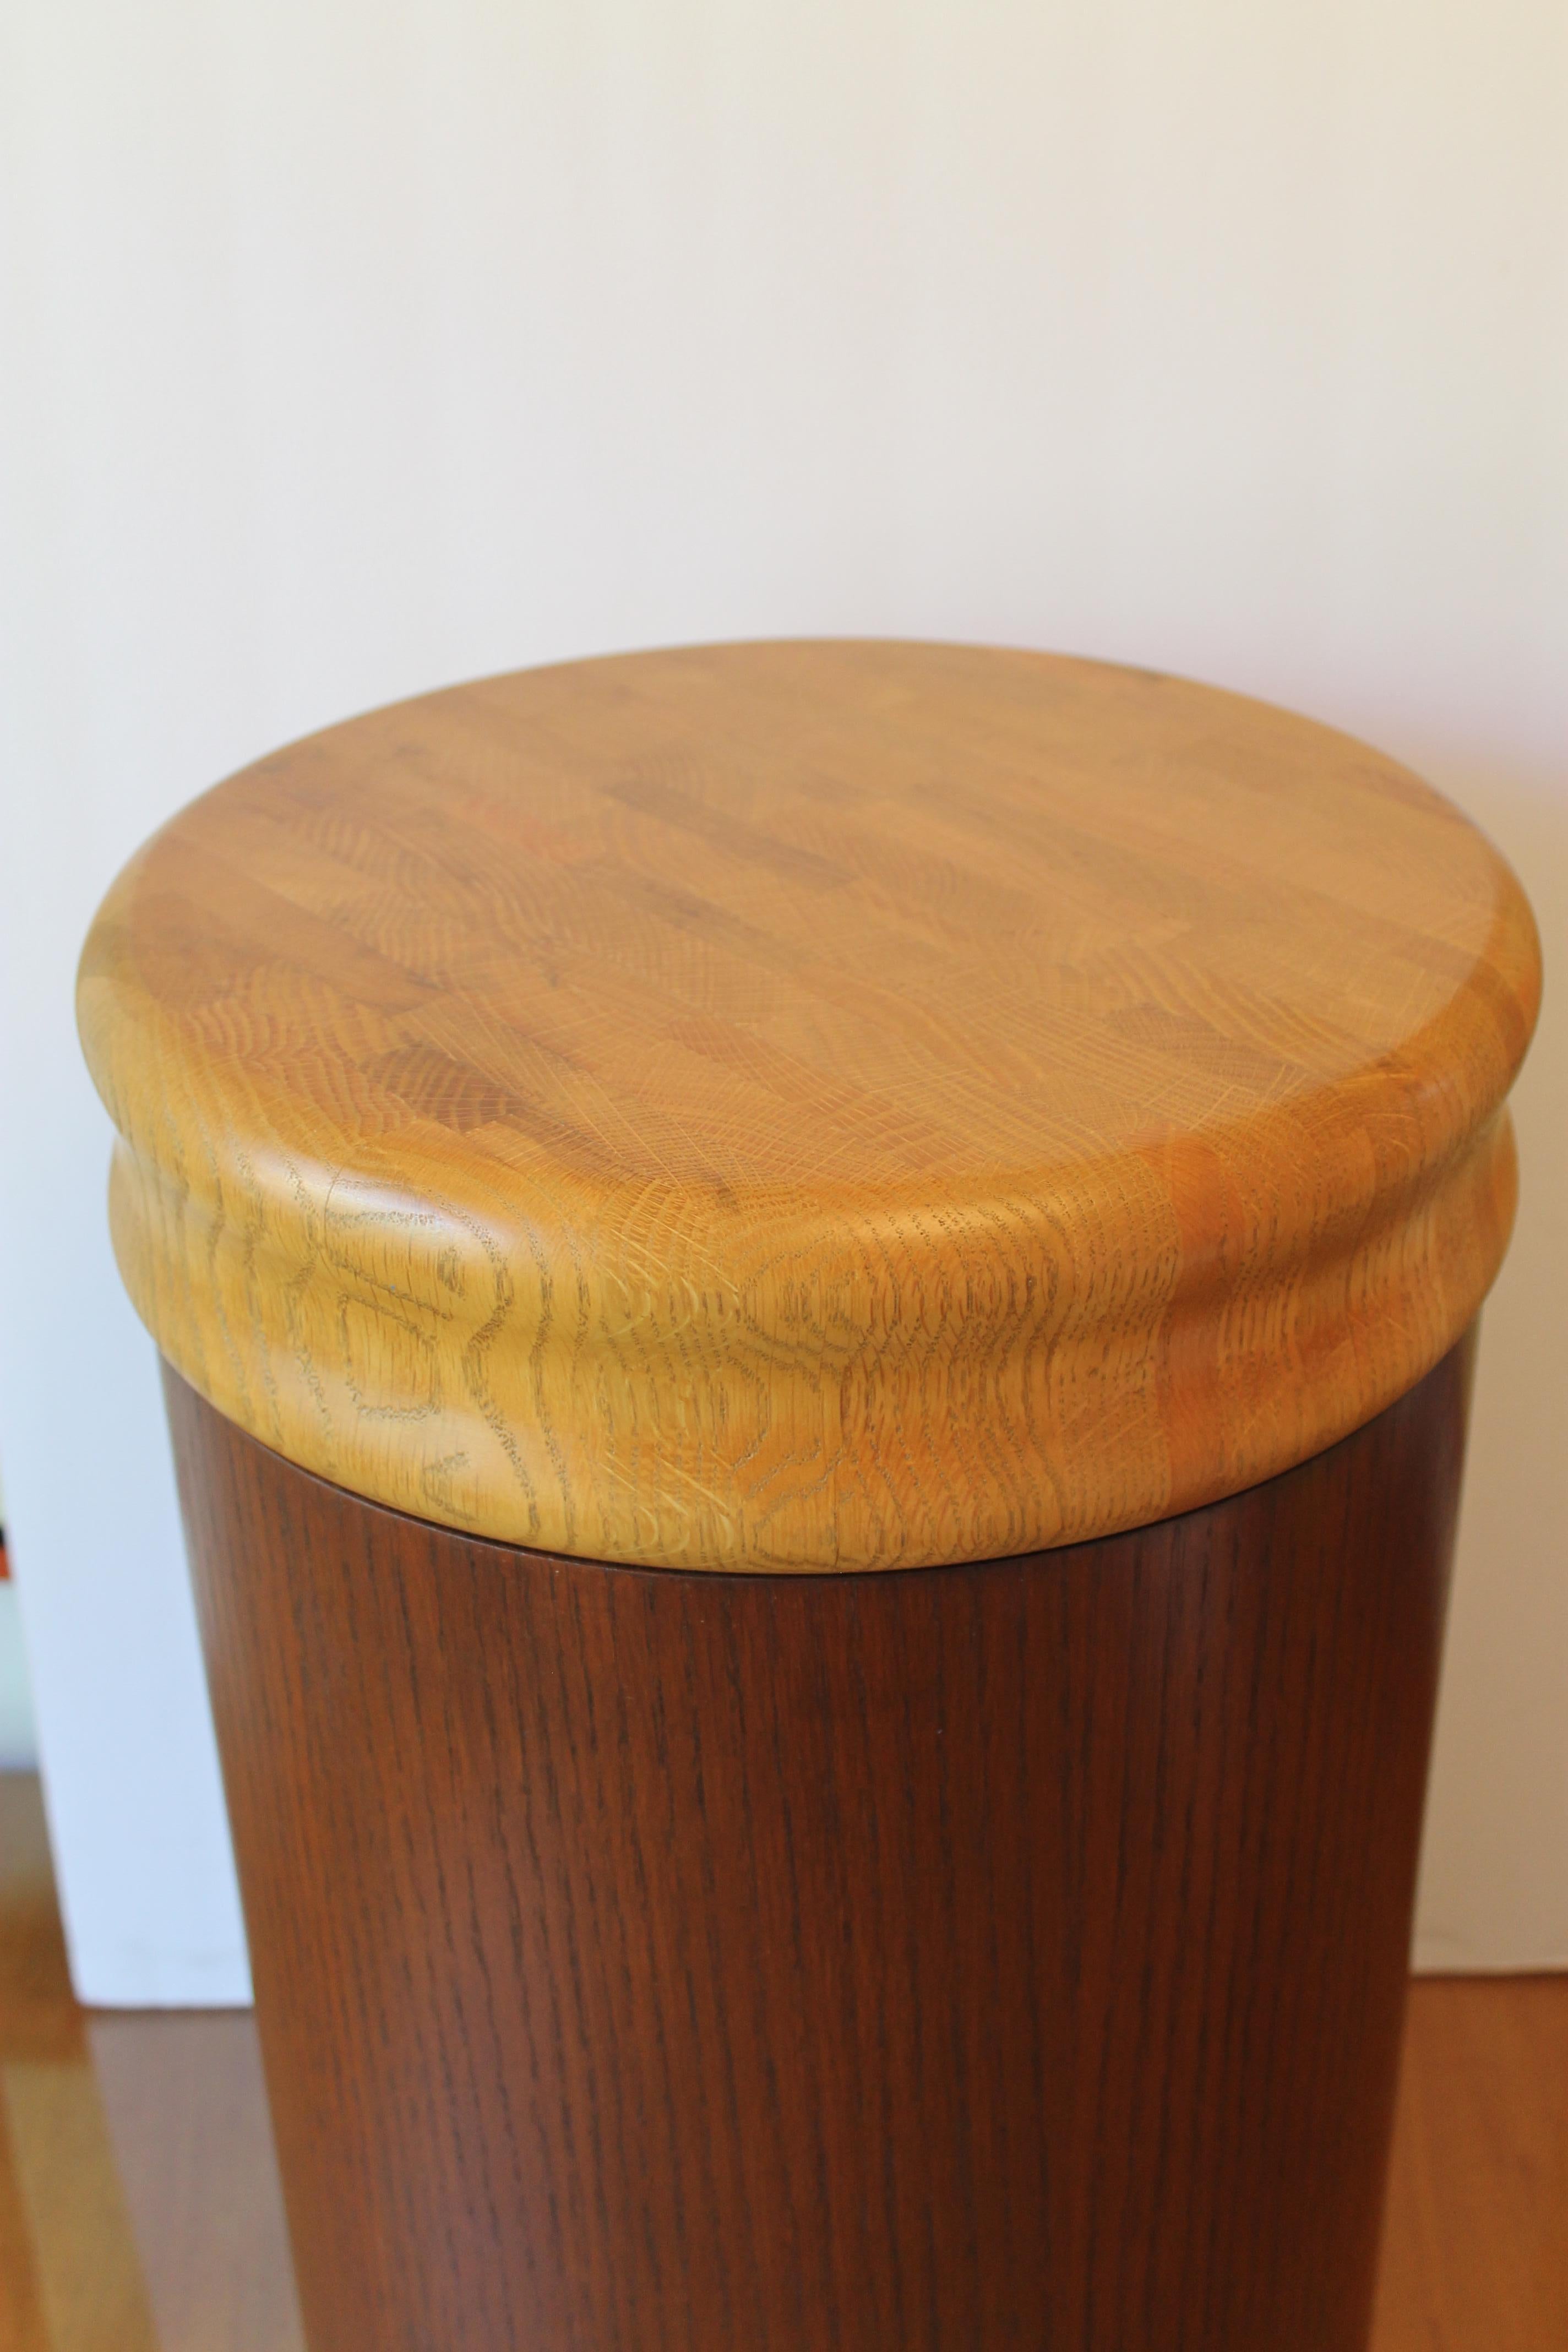 Pedestal with cutting board top. Possibly a Danish design. It can be used as a stool, storage container or pedestal. The wood top is 3.5” high and 12.5” diameter. The base is 15.75” high and 12” diameter. Once top is added the total height is 18.75”.